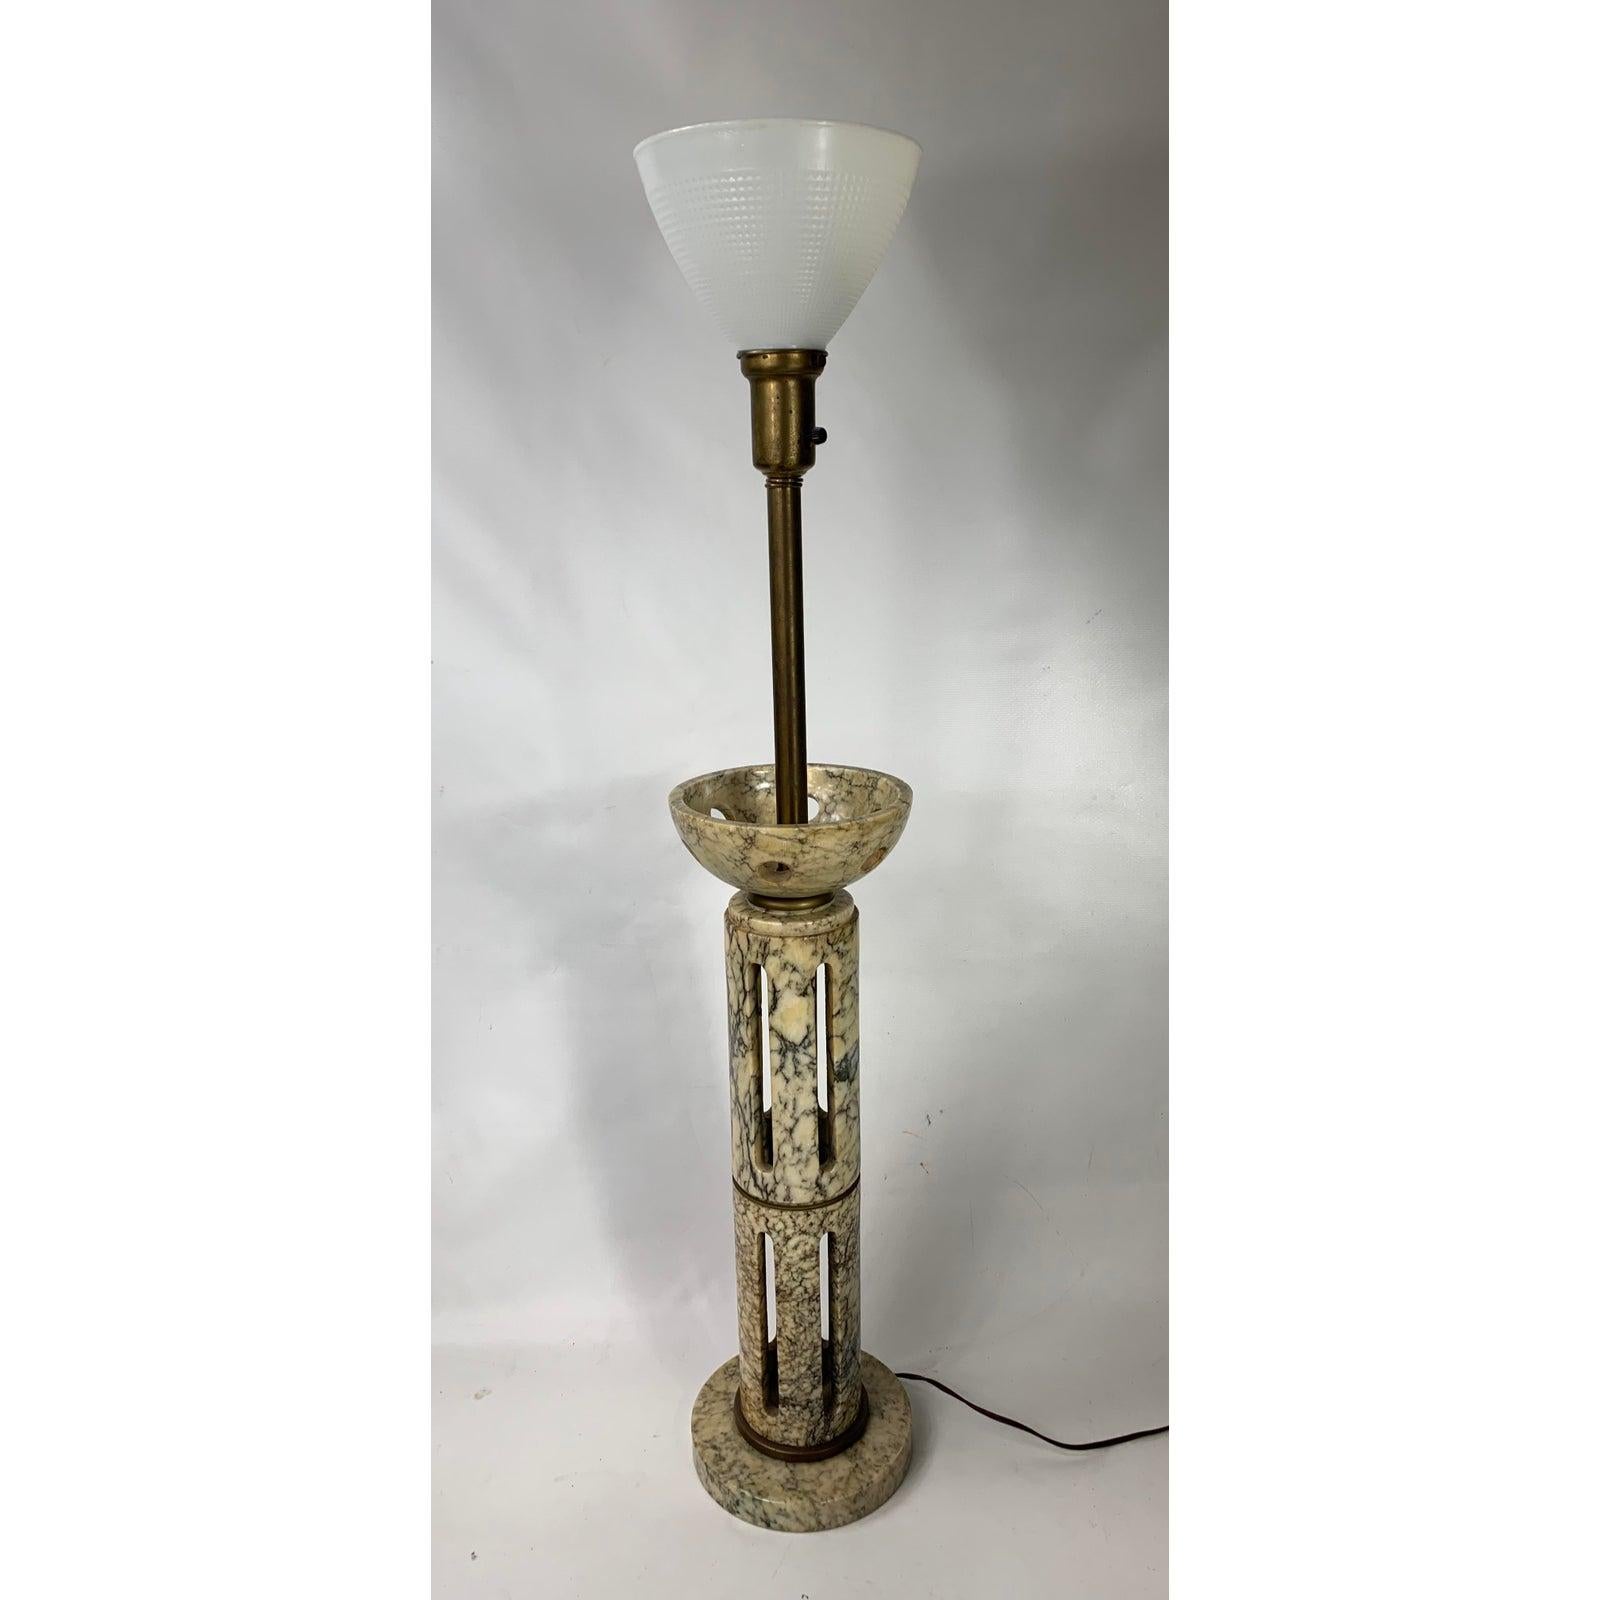 Very unique large mid-century alabaster table lamp.